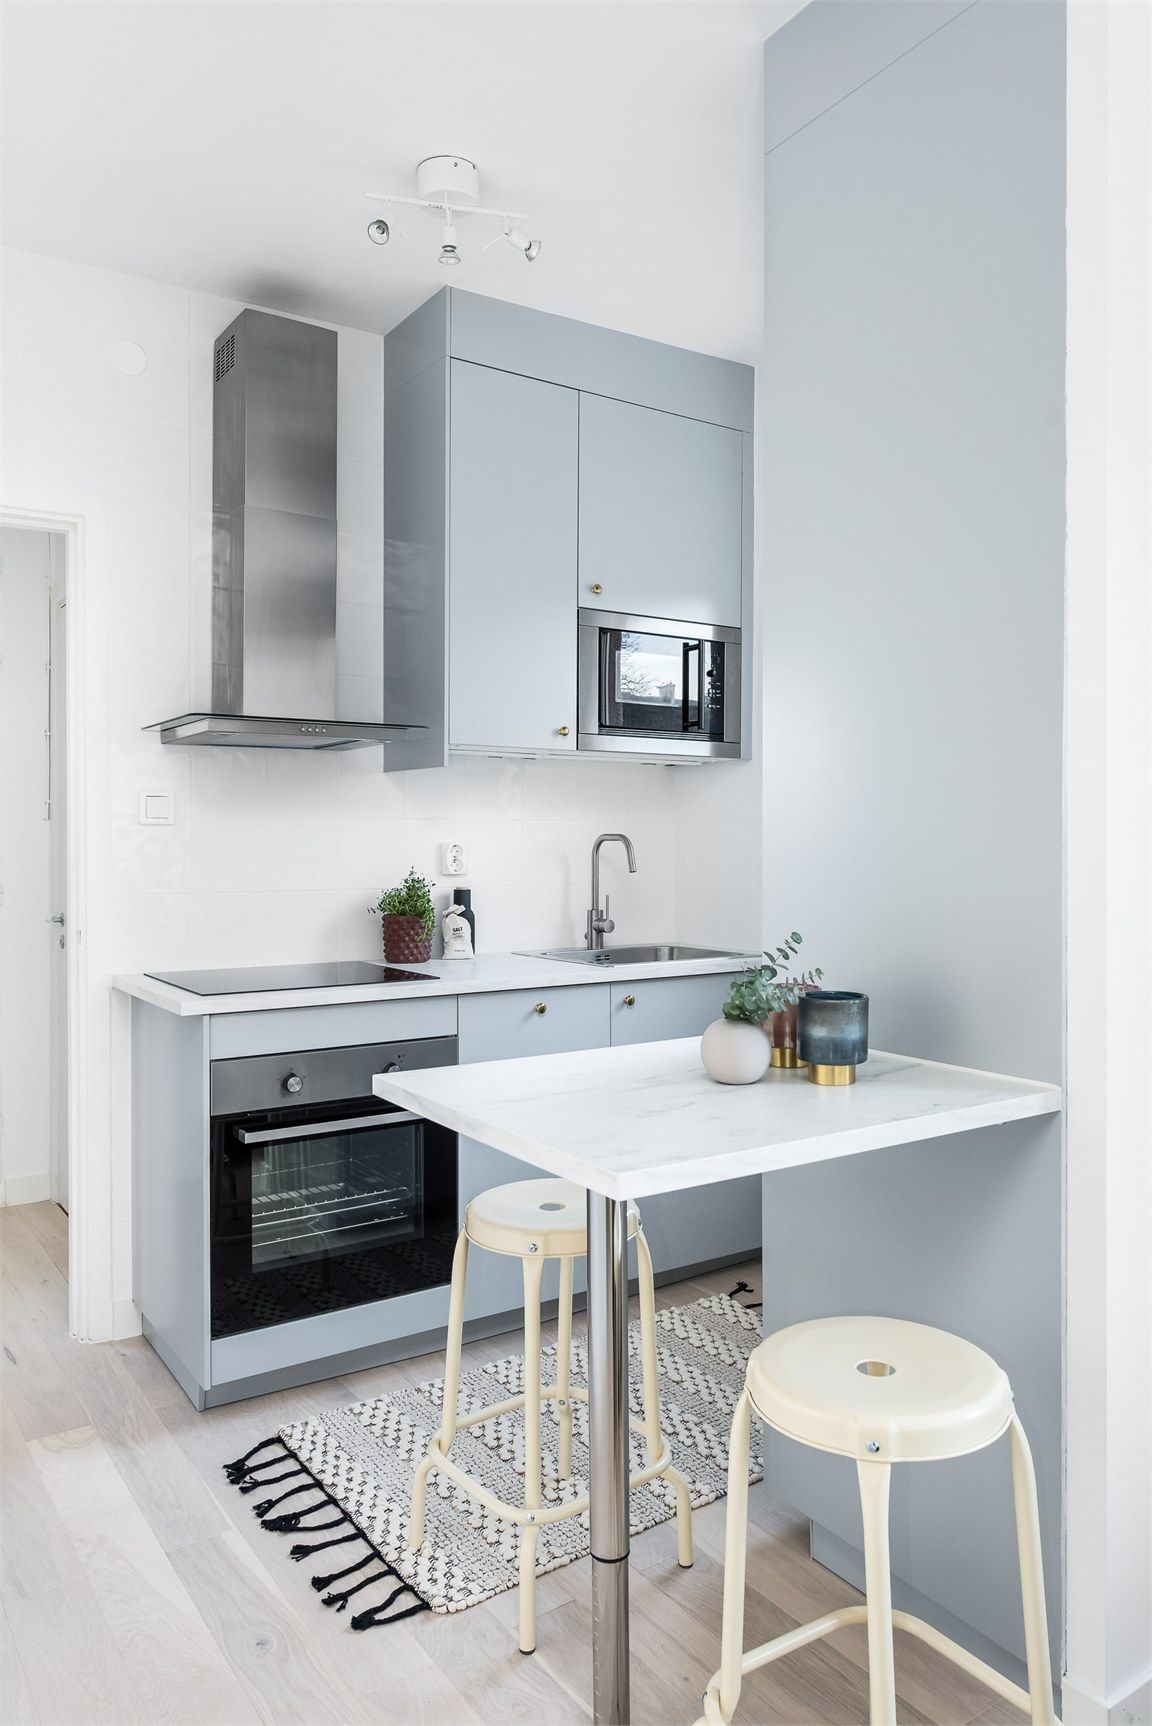 80+ Small Kitchen Ideas to Make the Most of Your Cooking Space